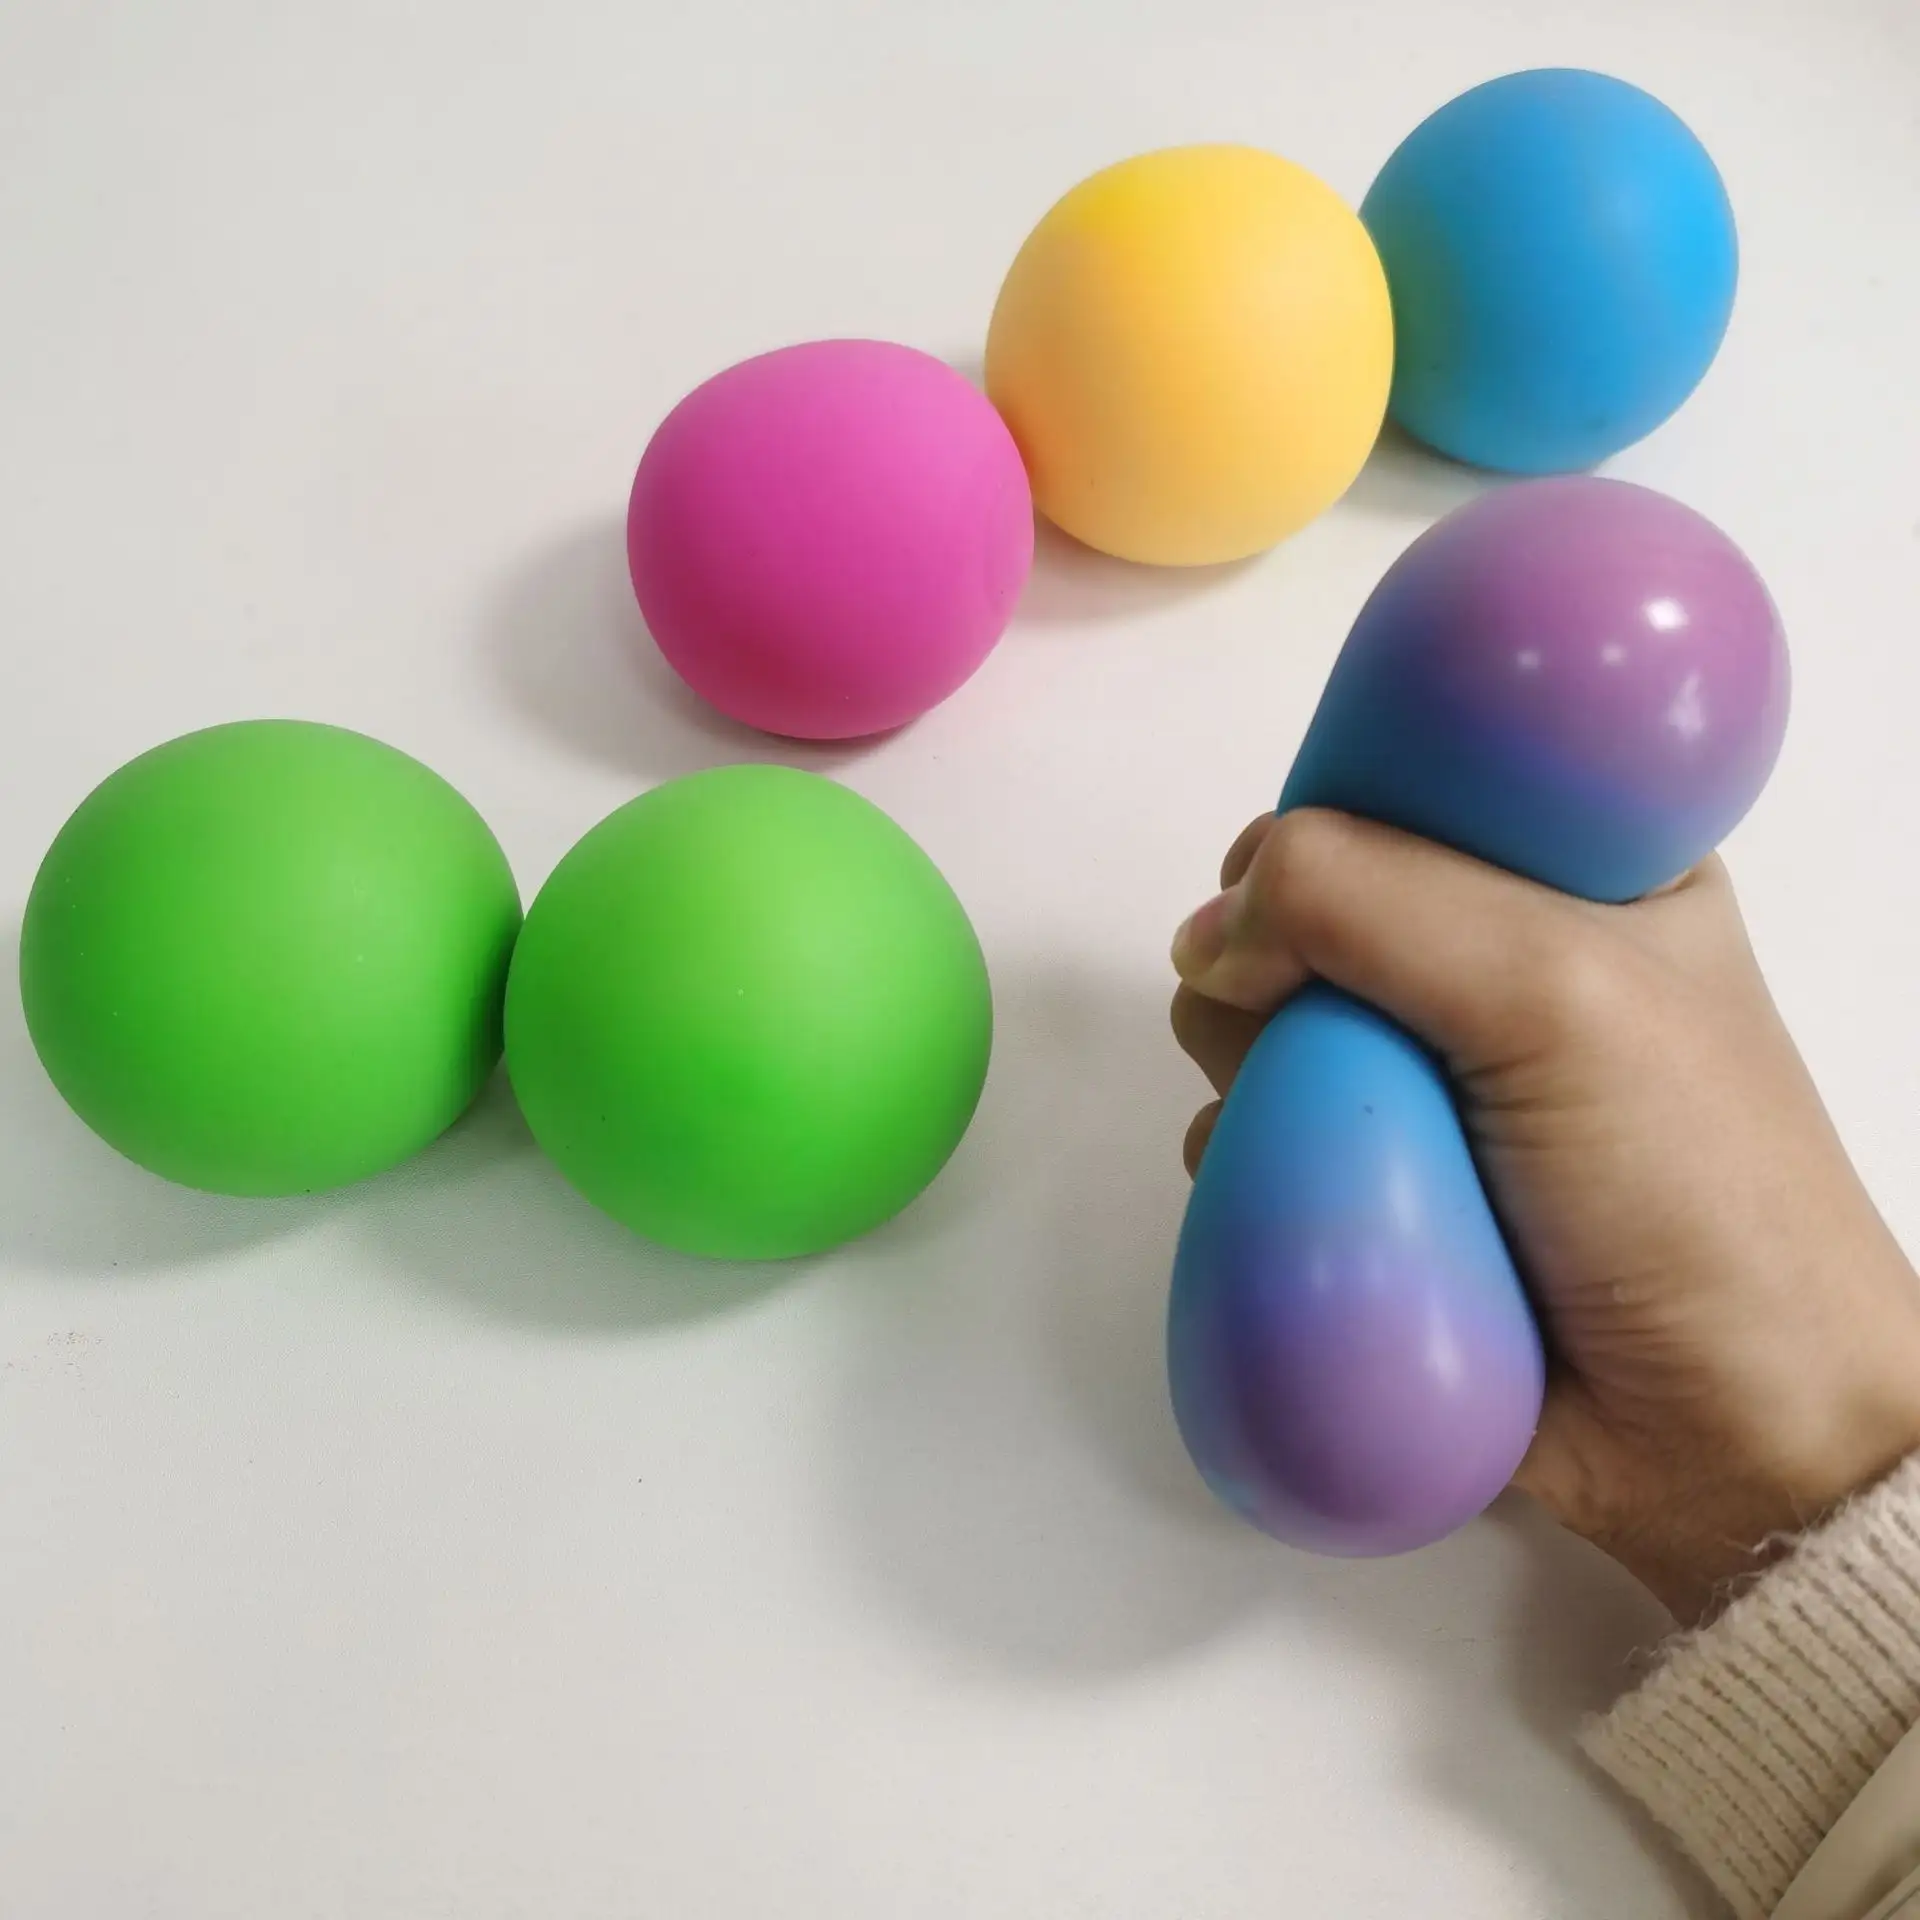 Hot Sale 6cm High Quality Soft Rubber Ball Stress Ball Change Color Anti Stress Toys Squeeze Ball